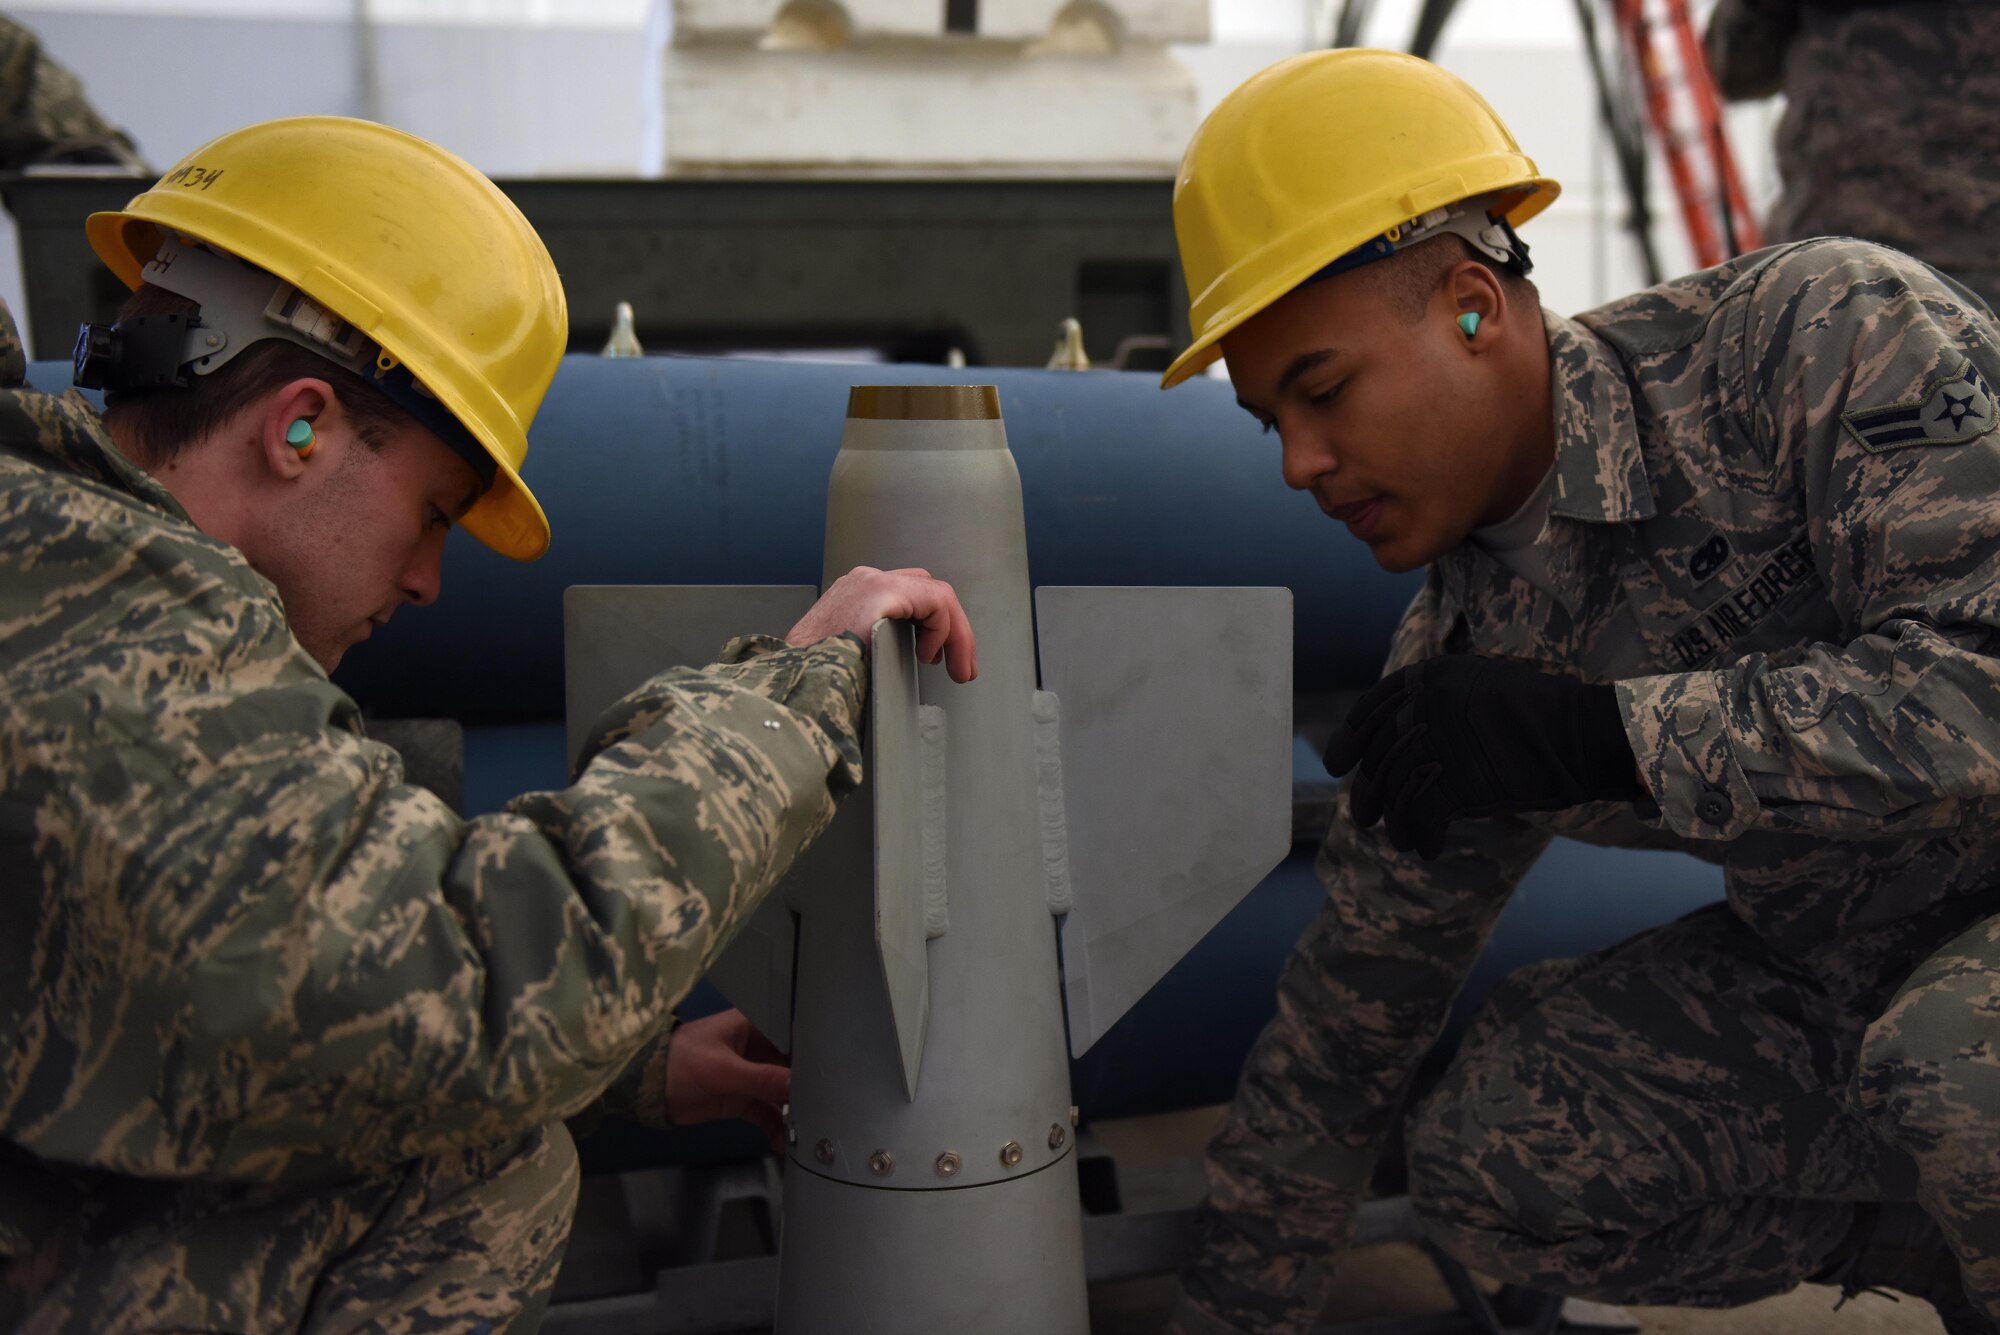 U.S. Air Force Airman 1st Class Joshua E. Holland and Airman 1st Class Jeremiah L. Buckmaster, munitions systems specialists assigned to the 180th Fighter Wing, Ohio Air National Guard, inspect a GPS guided airfoil group Feb. 5, 2017 at the Toledo Express Airport in Swanton, Ohio. Munitions systems specialists procure, inspect, store, recondition, issue, transport, maintain, test and assemble GPS/laser guided and unguided munitions for 180FW F-16 Fighting Falcons. (U.S. Air National Guard photo by Staff Sgt. John Wilkes)